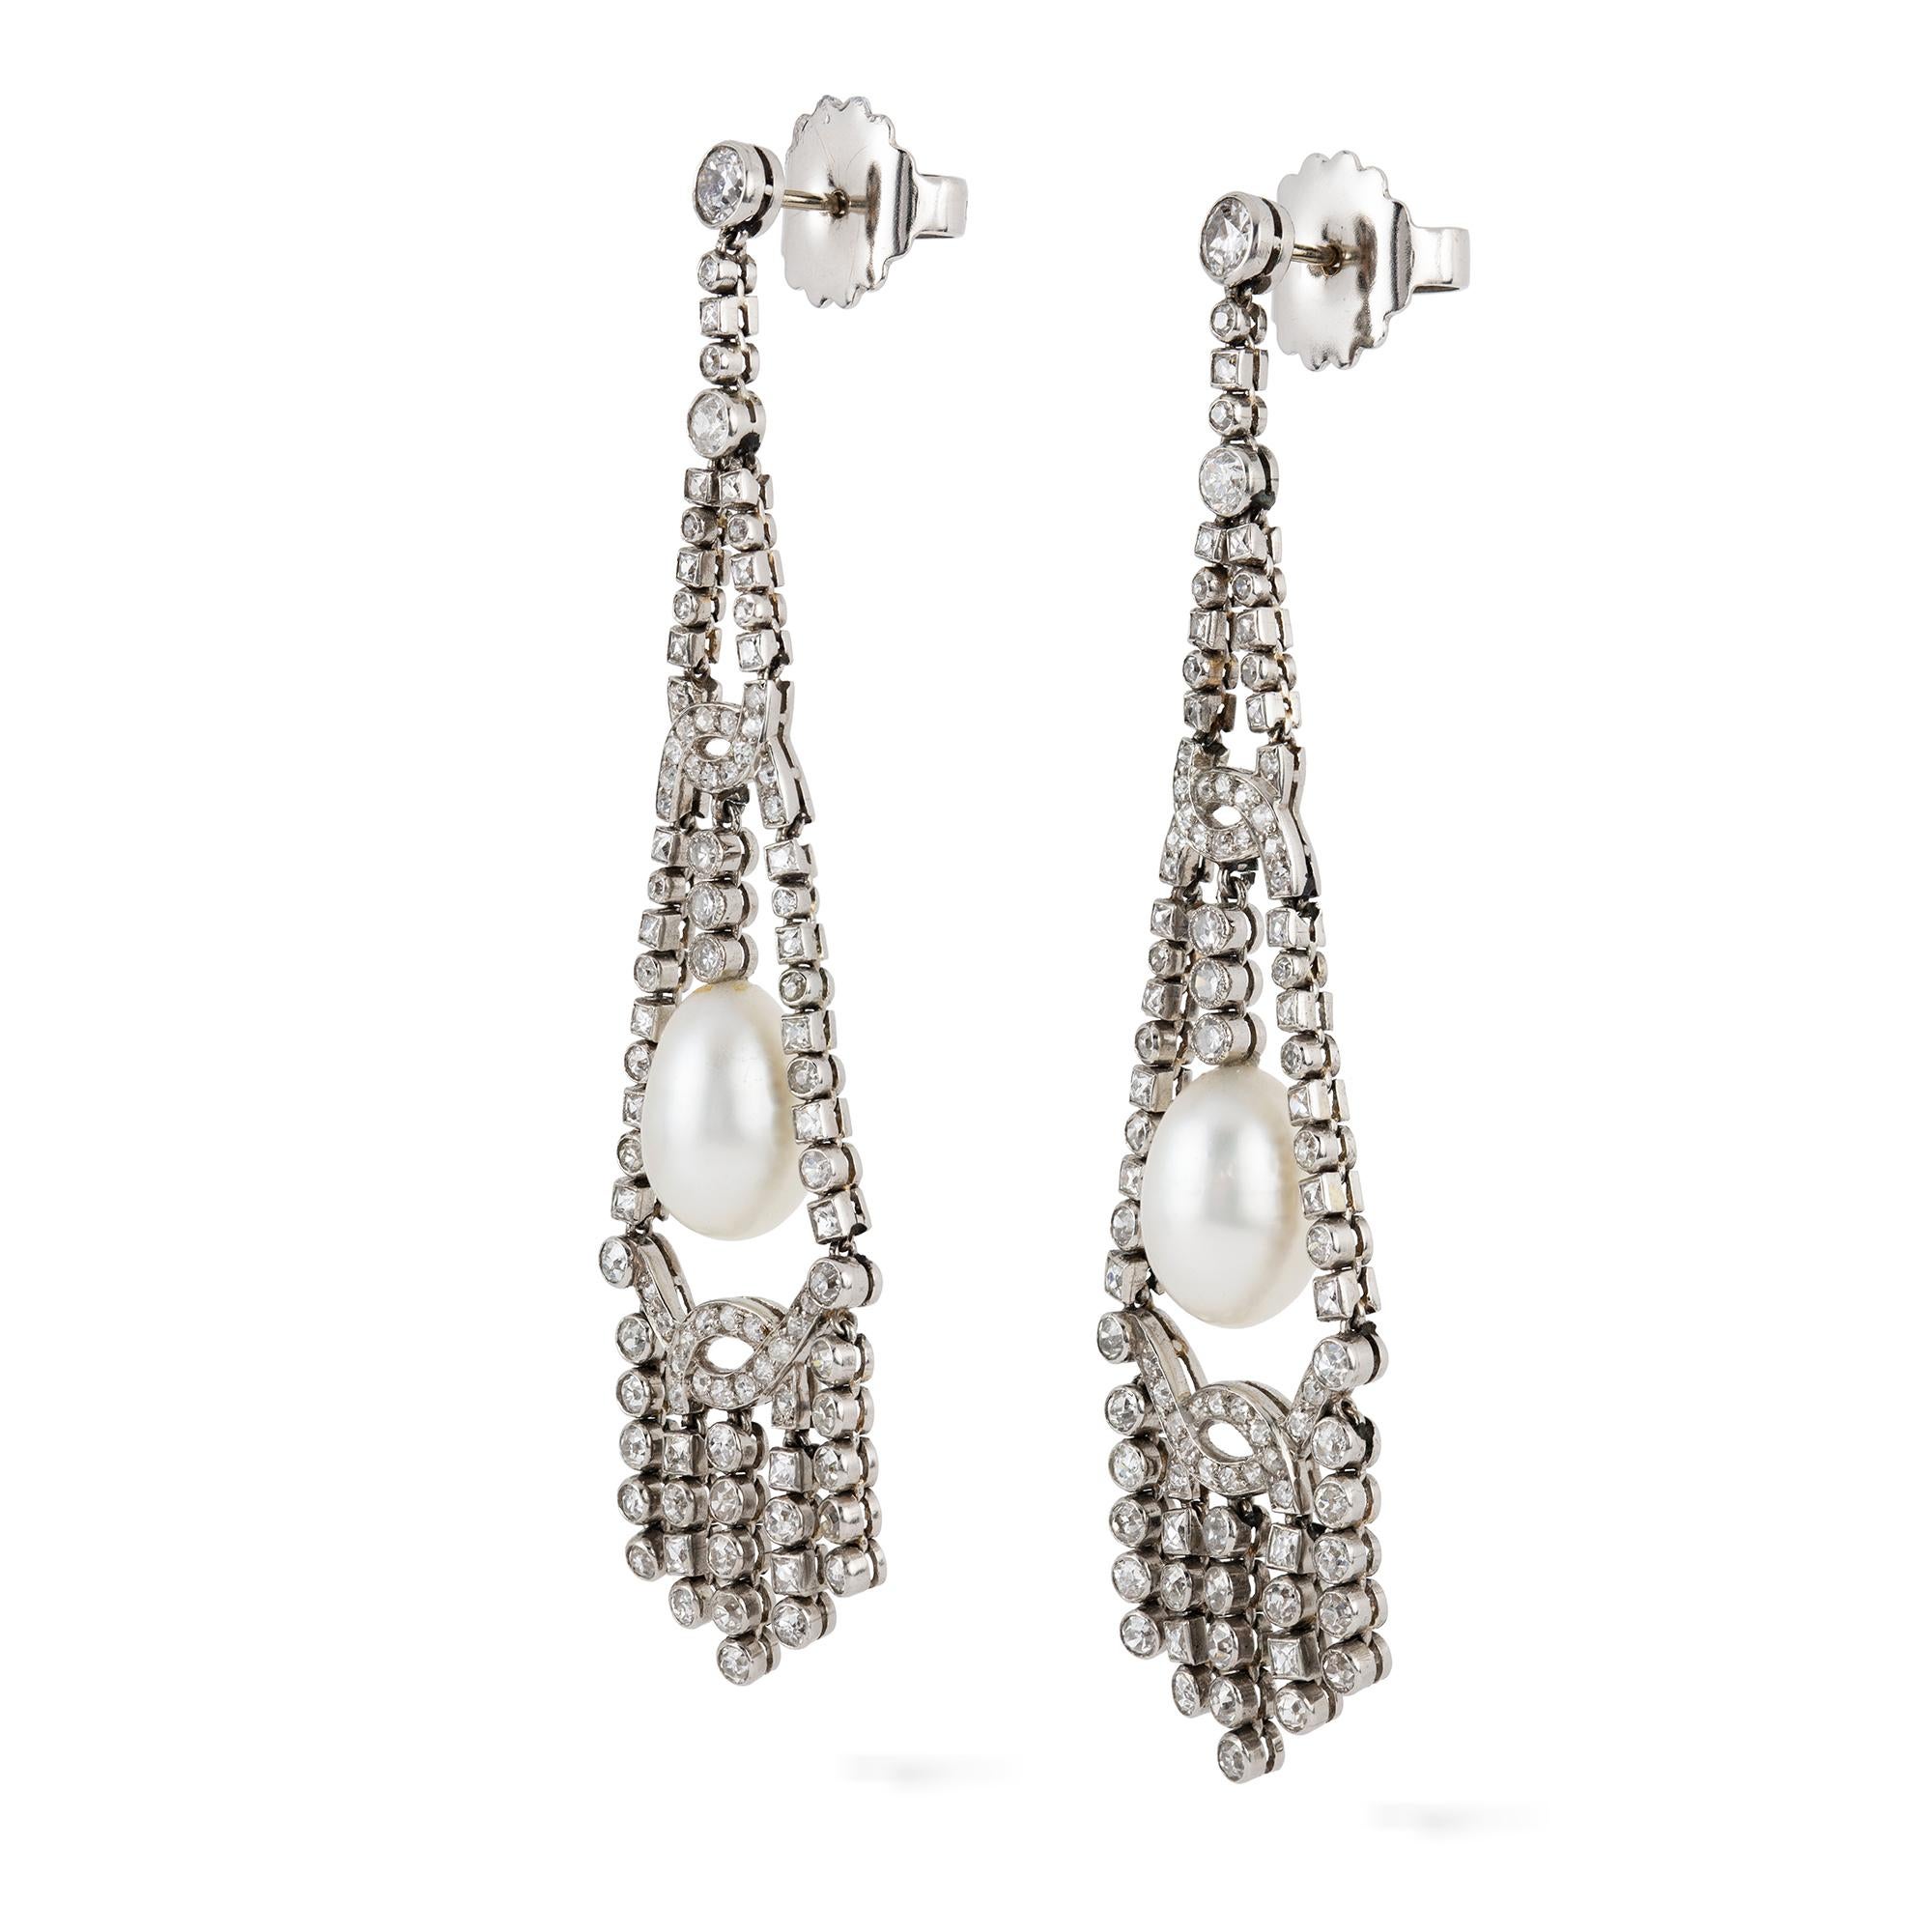 An important pair of Art Deco pearl and diamond fringe drop earrings, the two natural saltwater pearls measuring approximately 8 x 12mm and weighing a total of 10.04 carats, accompanied by Gem & Pearl Laboratory certificate, each suspended within a